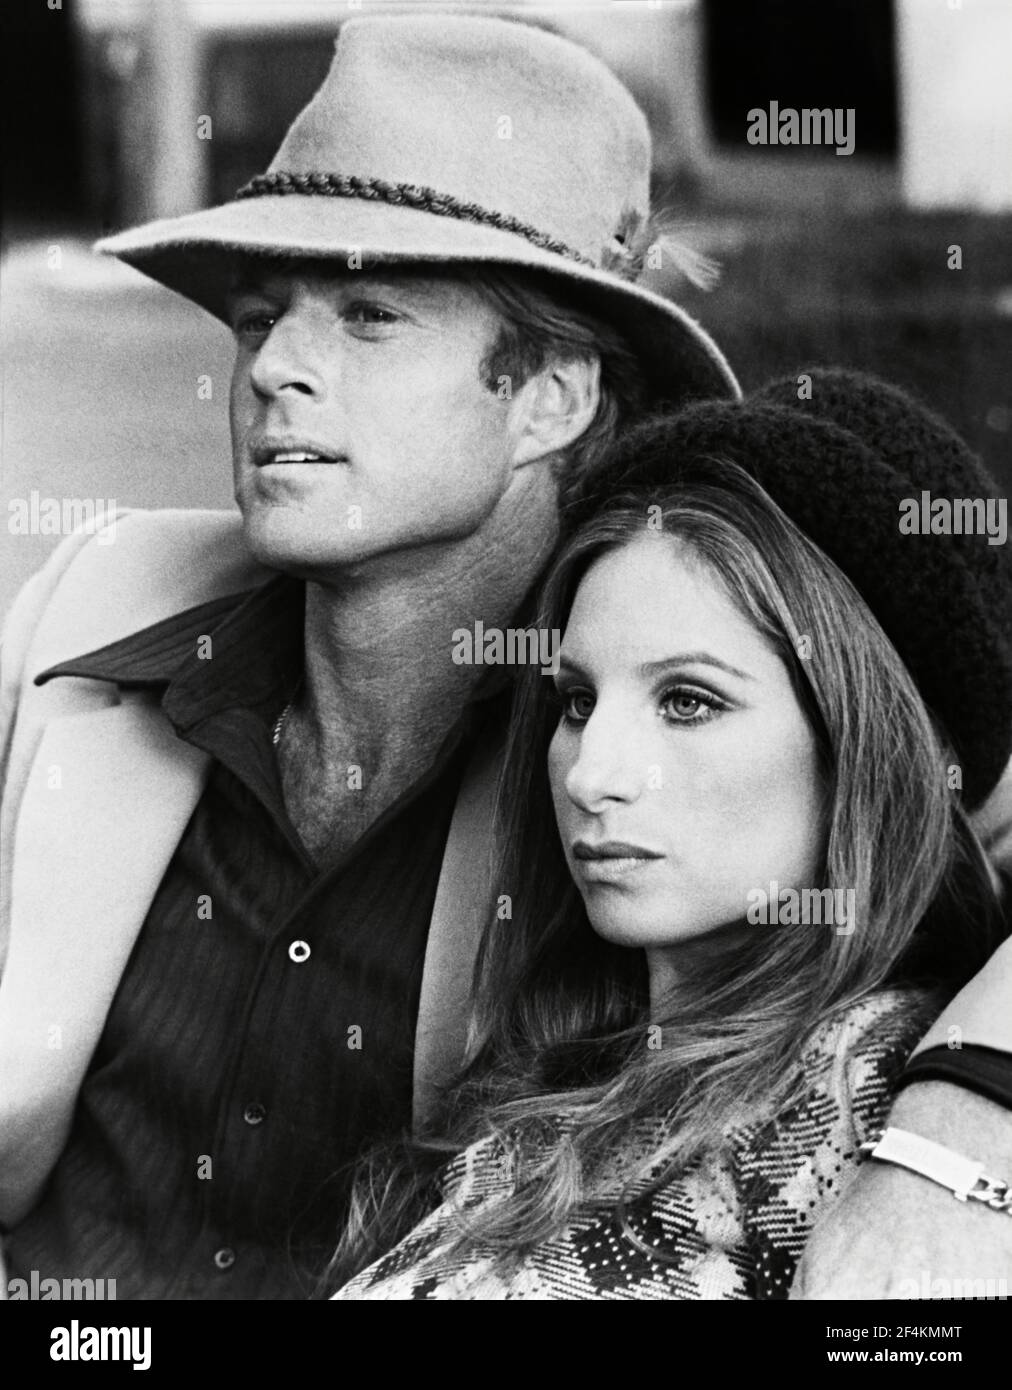 BARBRA STREISAND and ROBERT REDFORD in THE WAY WE WERE (1973), directed by SYDNEY POLLACK. Credit: COLUMBIA PICTURES / Album Stock Photo